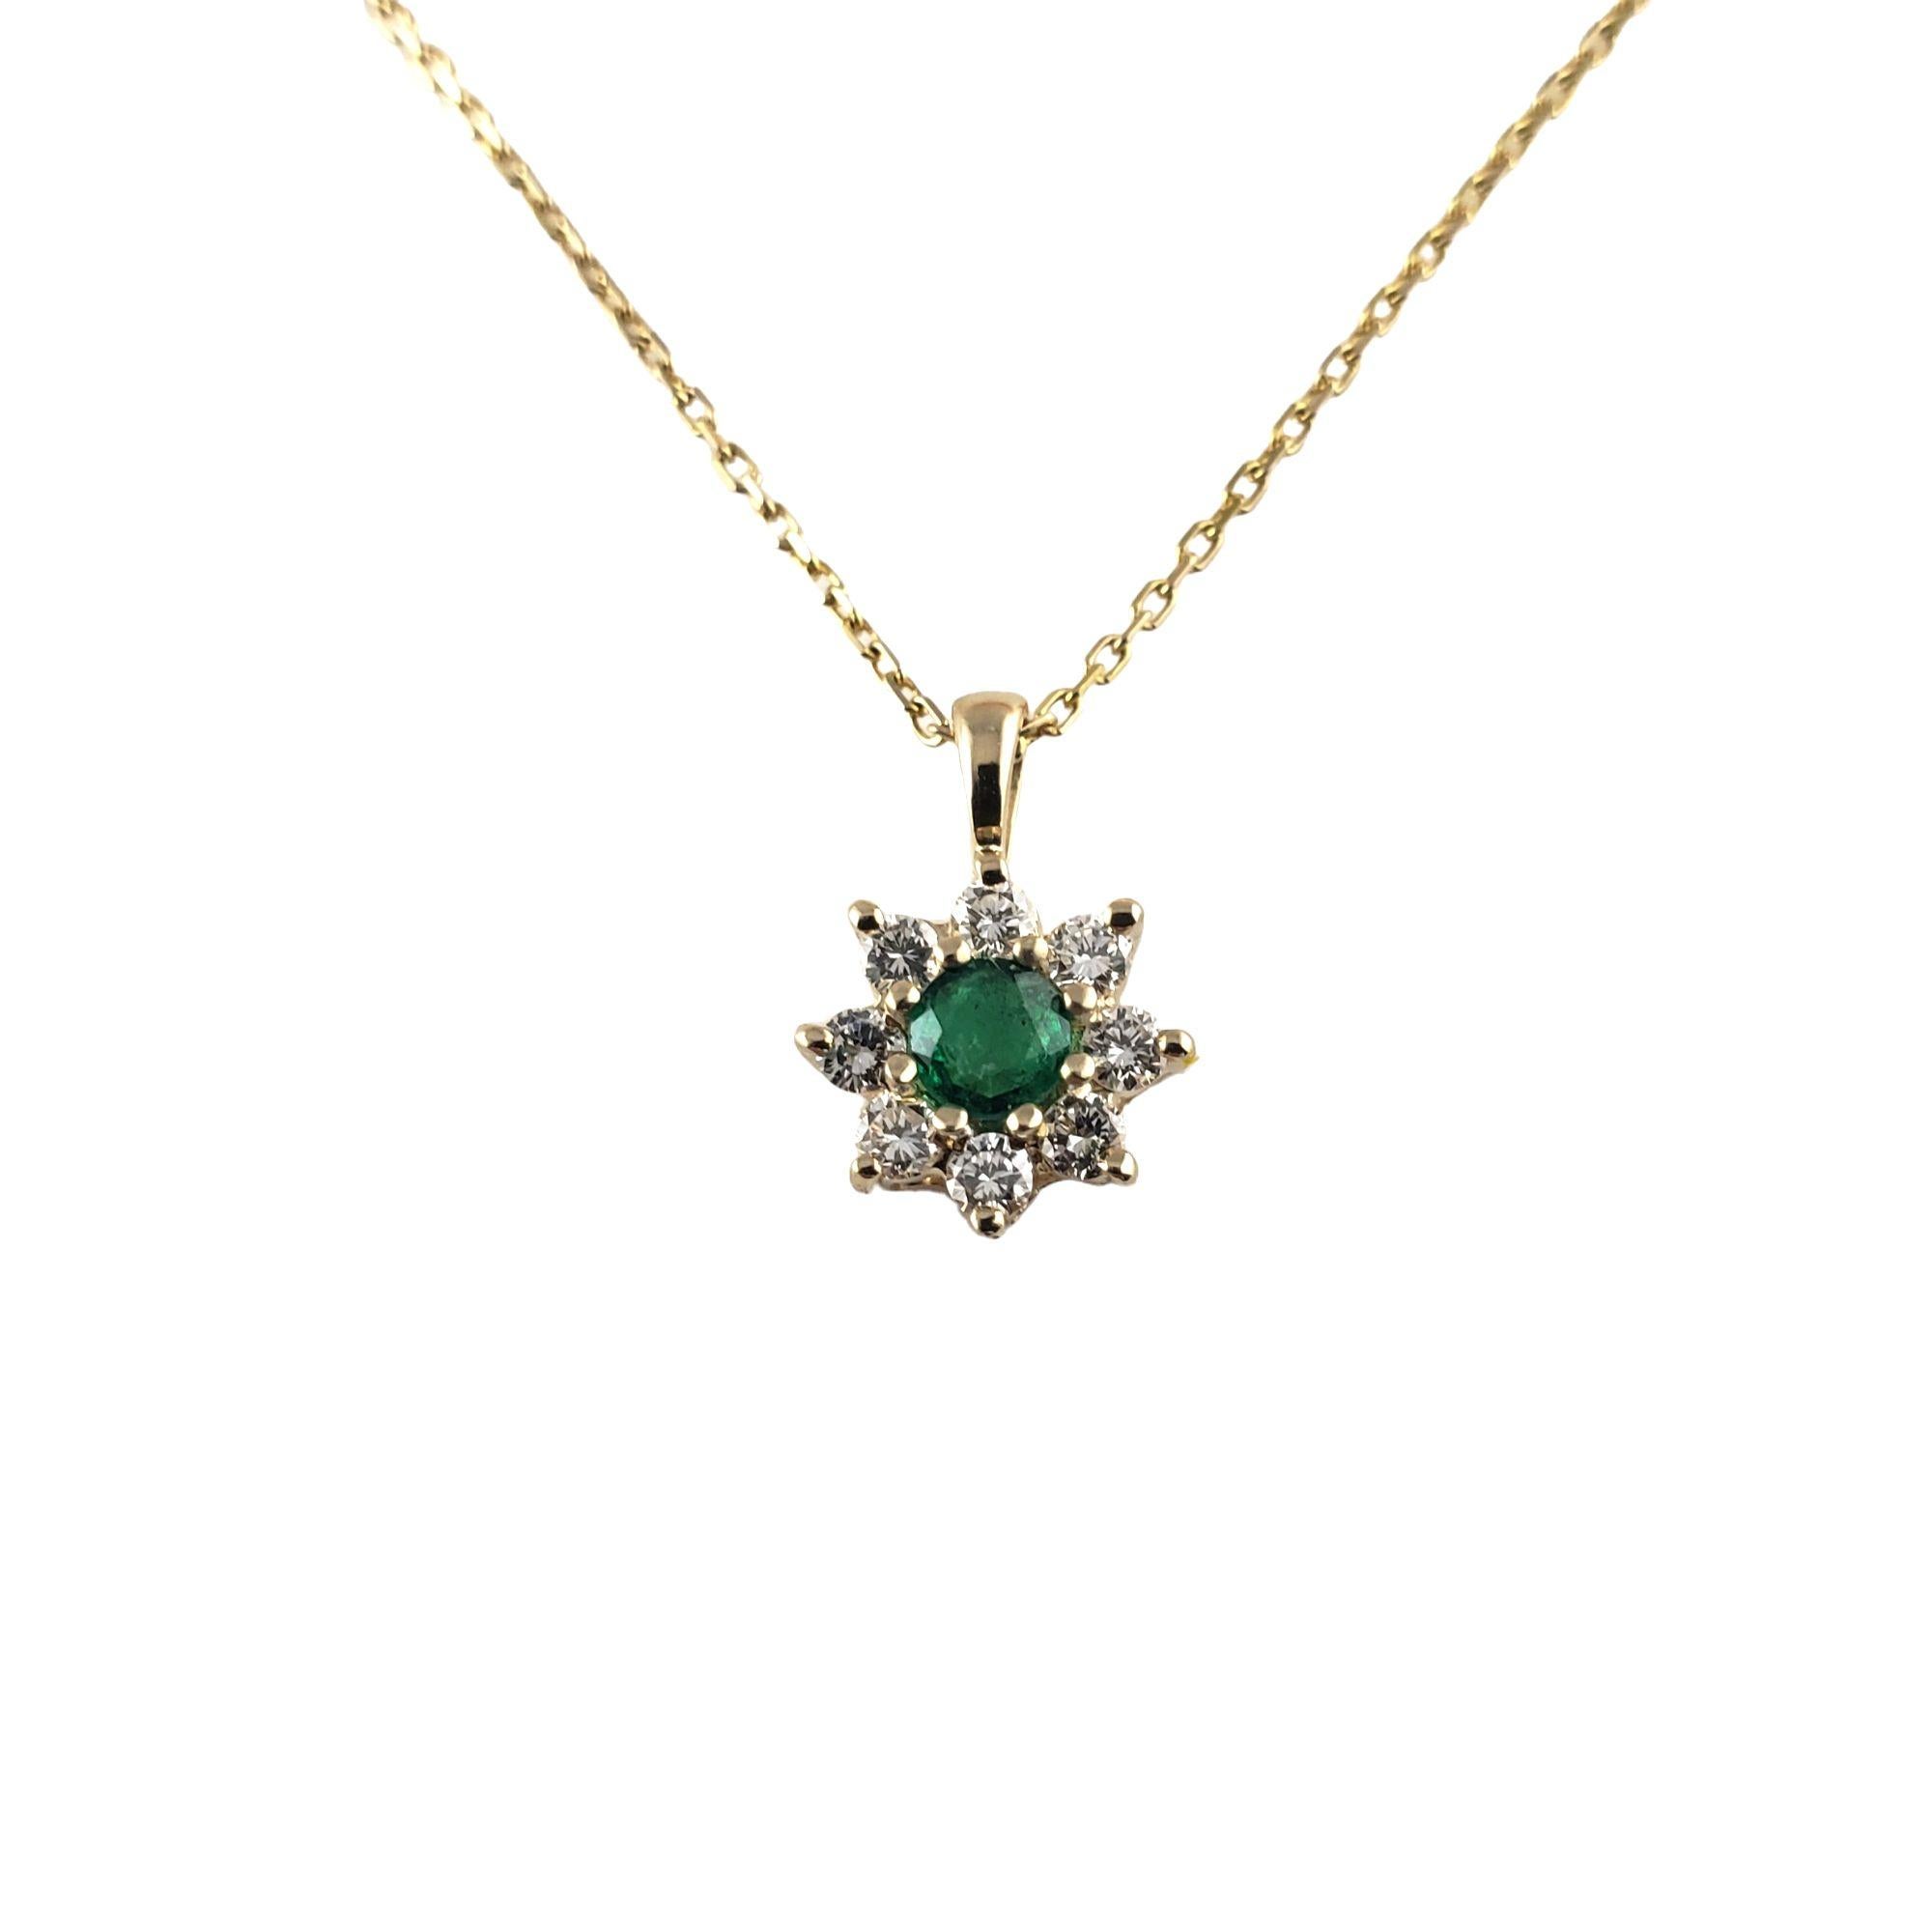 This lovely necklace features one round emerald (5 mm) and eight round brilliant cut diamonds set in classic 14K yellow gold.  Suspends from a classic cable necklace.

Approximate total diamond weight:  .32 ct.

Diamond color: F

Diamond clarity: